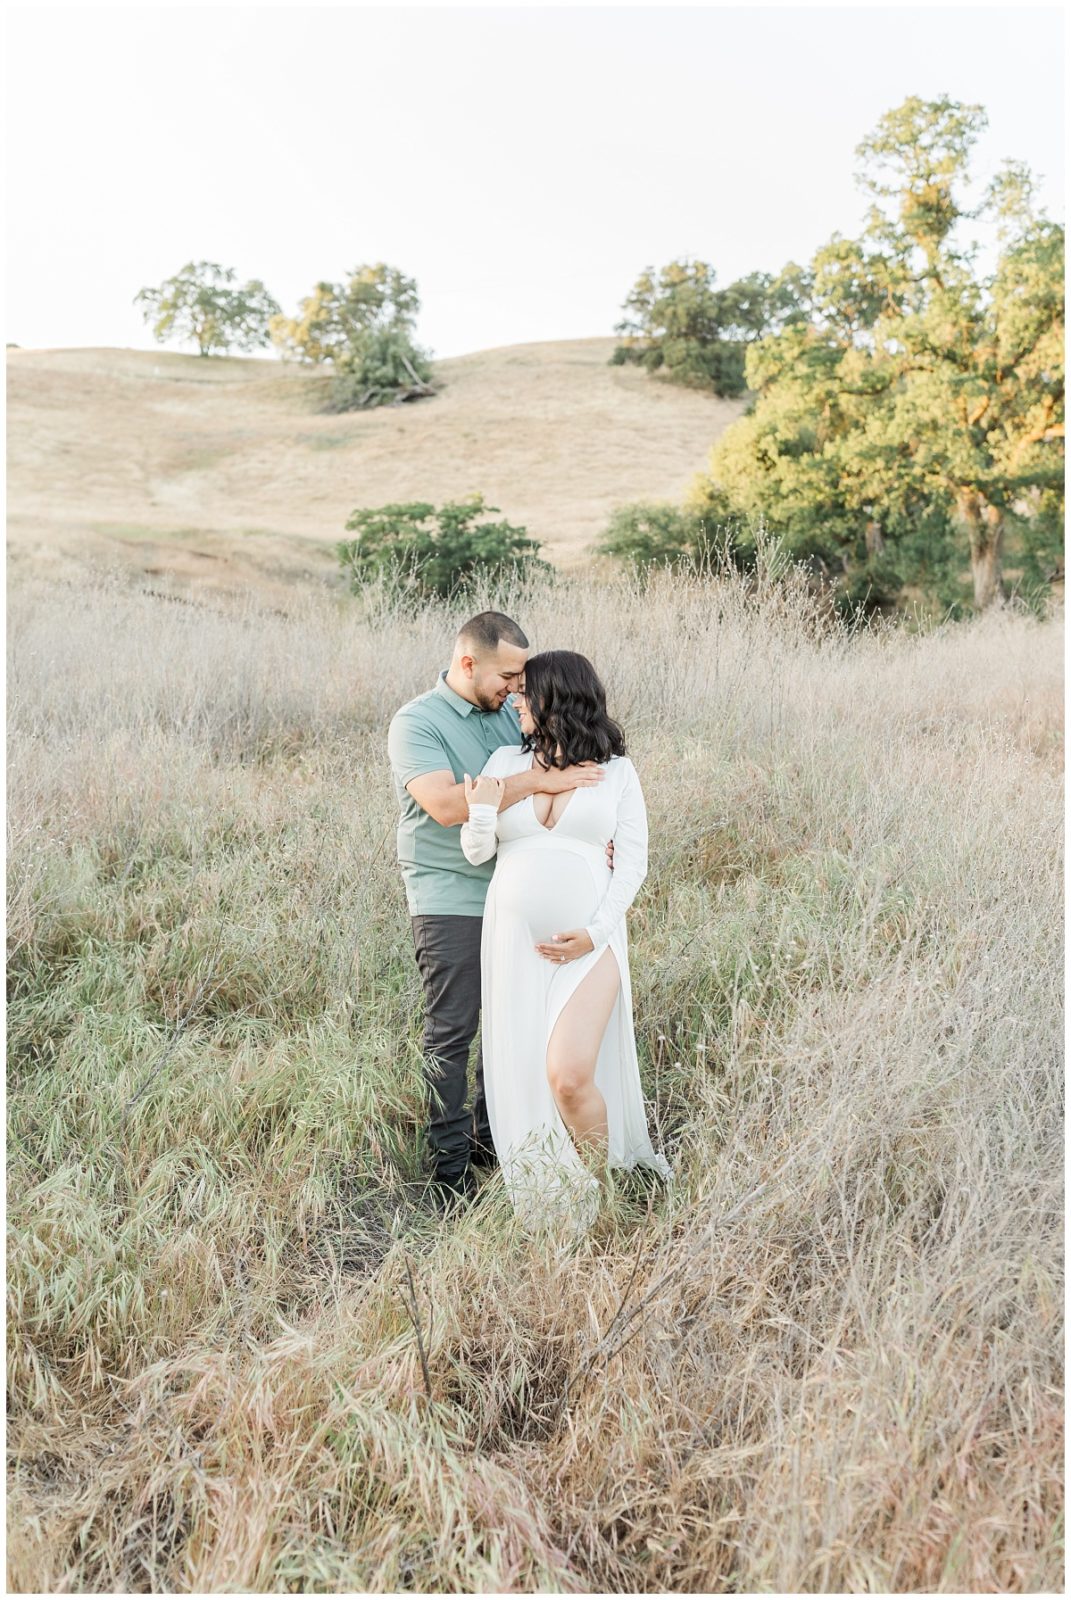 Knights Ferry Maternity Photos Grassy Field Intimate Moment